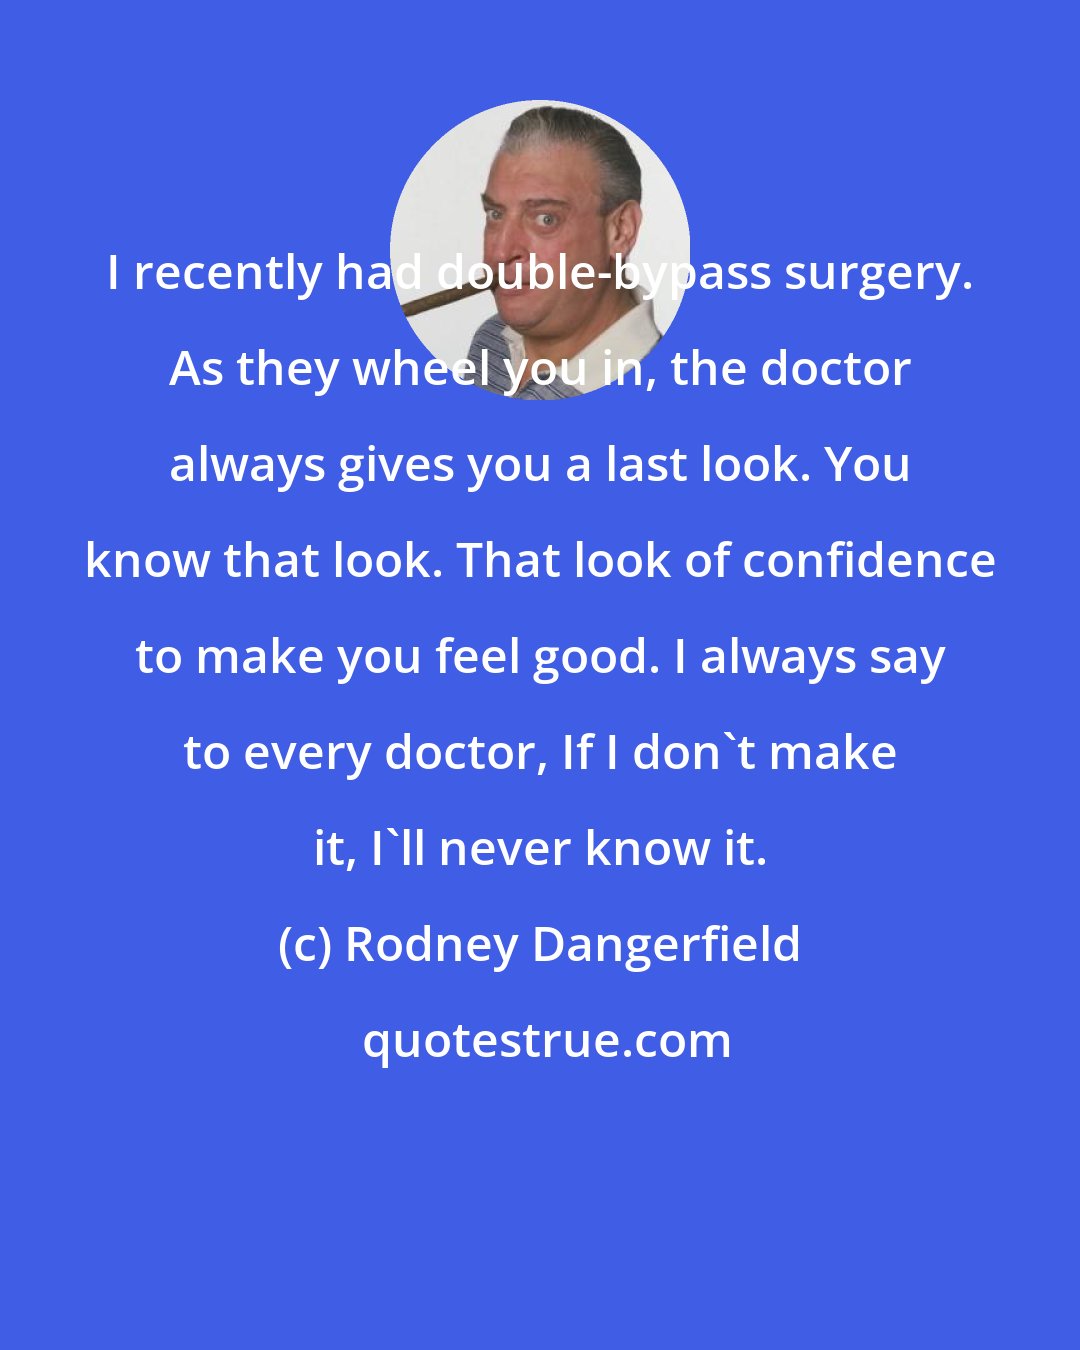 Rodney Dangerfield: I recently had double-bypass surgery. As they wheel you in, the doctor always gives you a last look. You know that look. That look of confidence to make you feel good. I always say to every doctor, If I don't make it, I'll never know it.